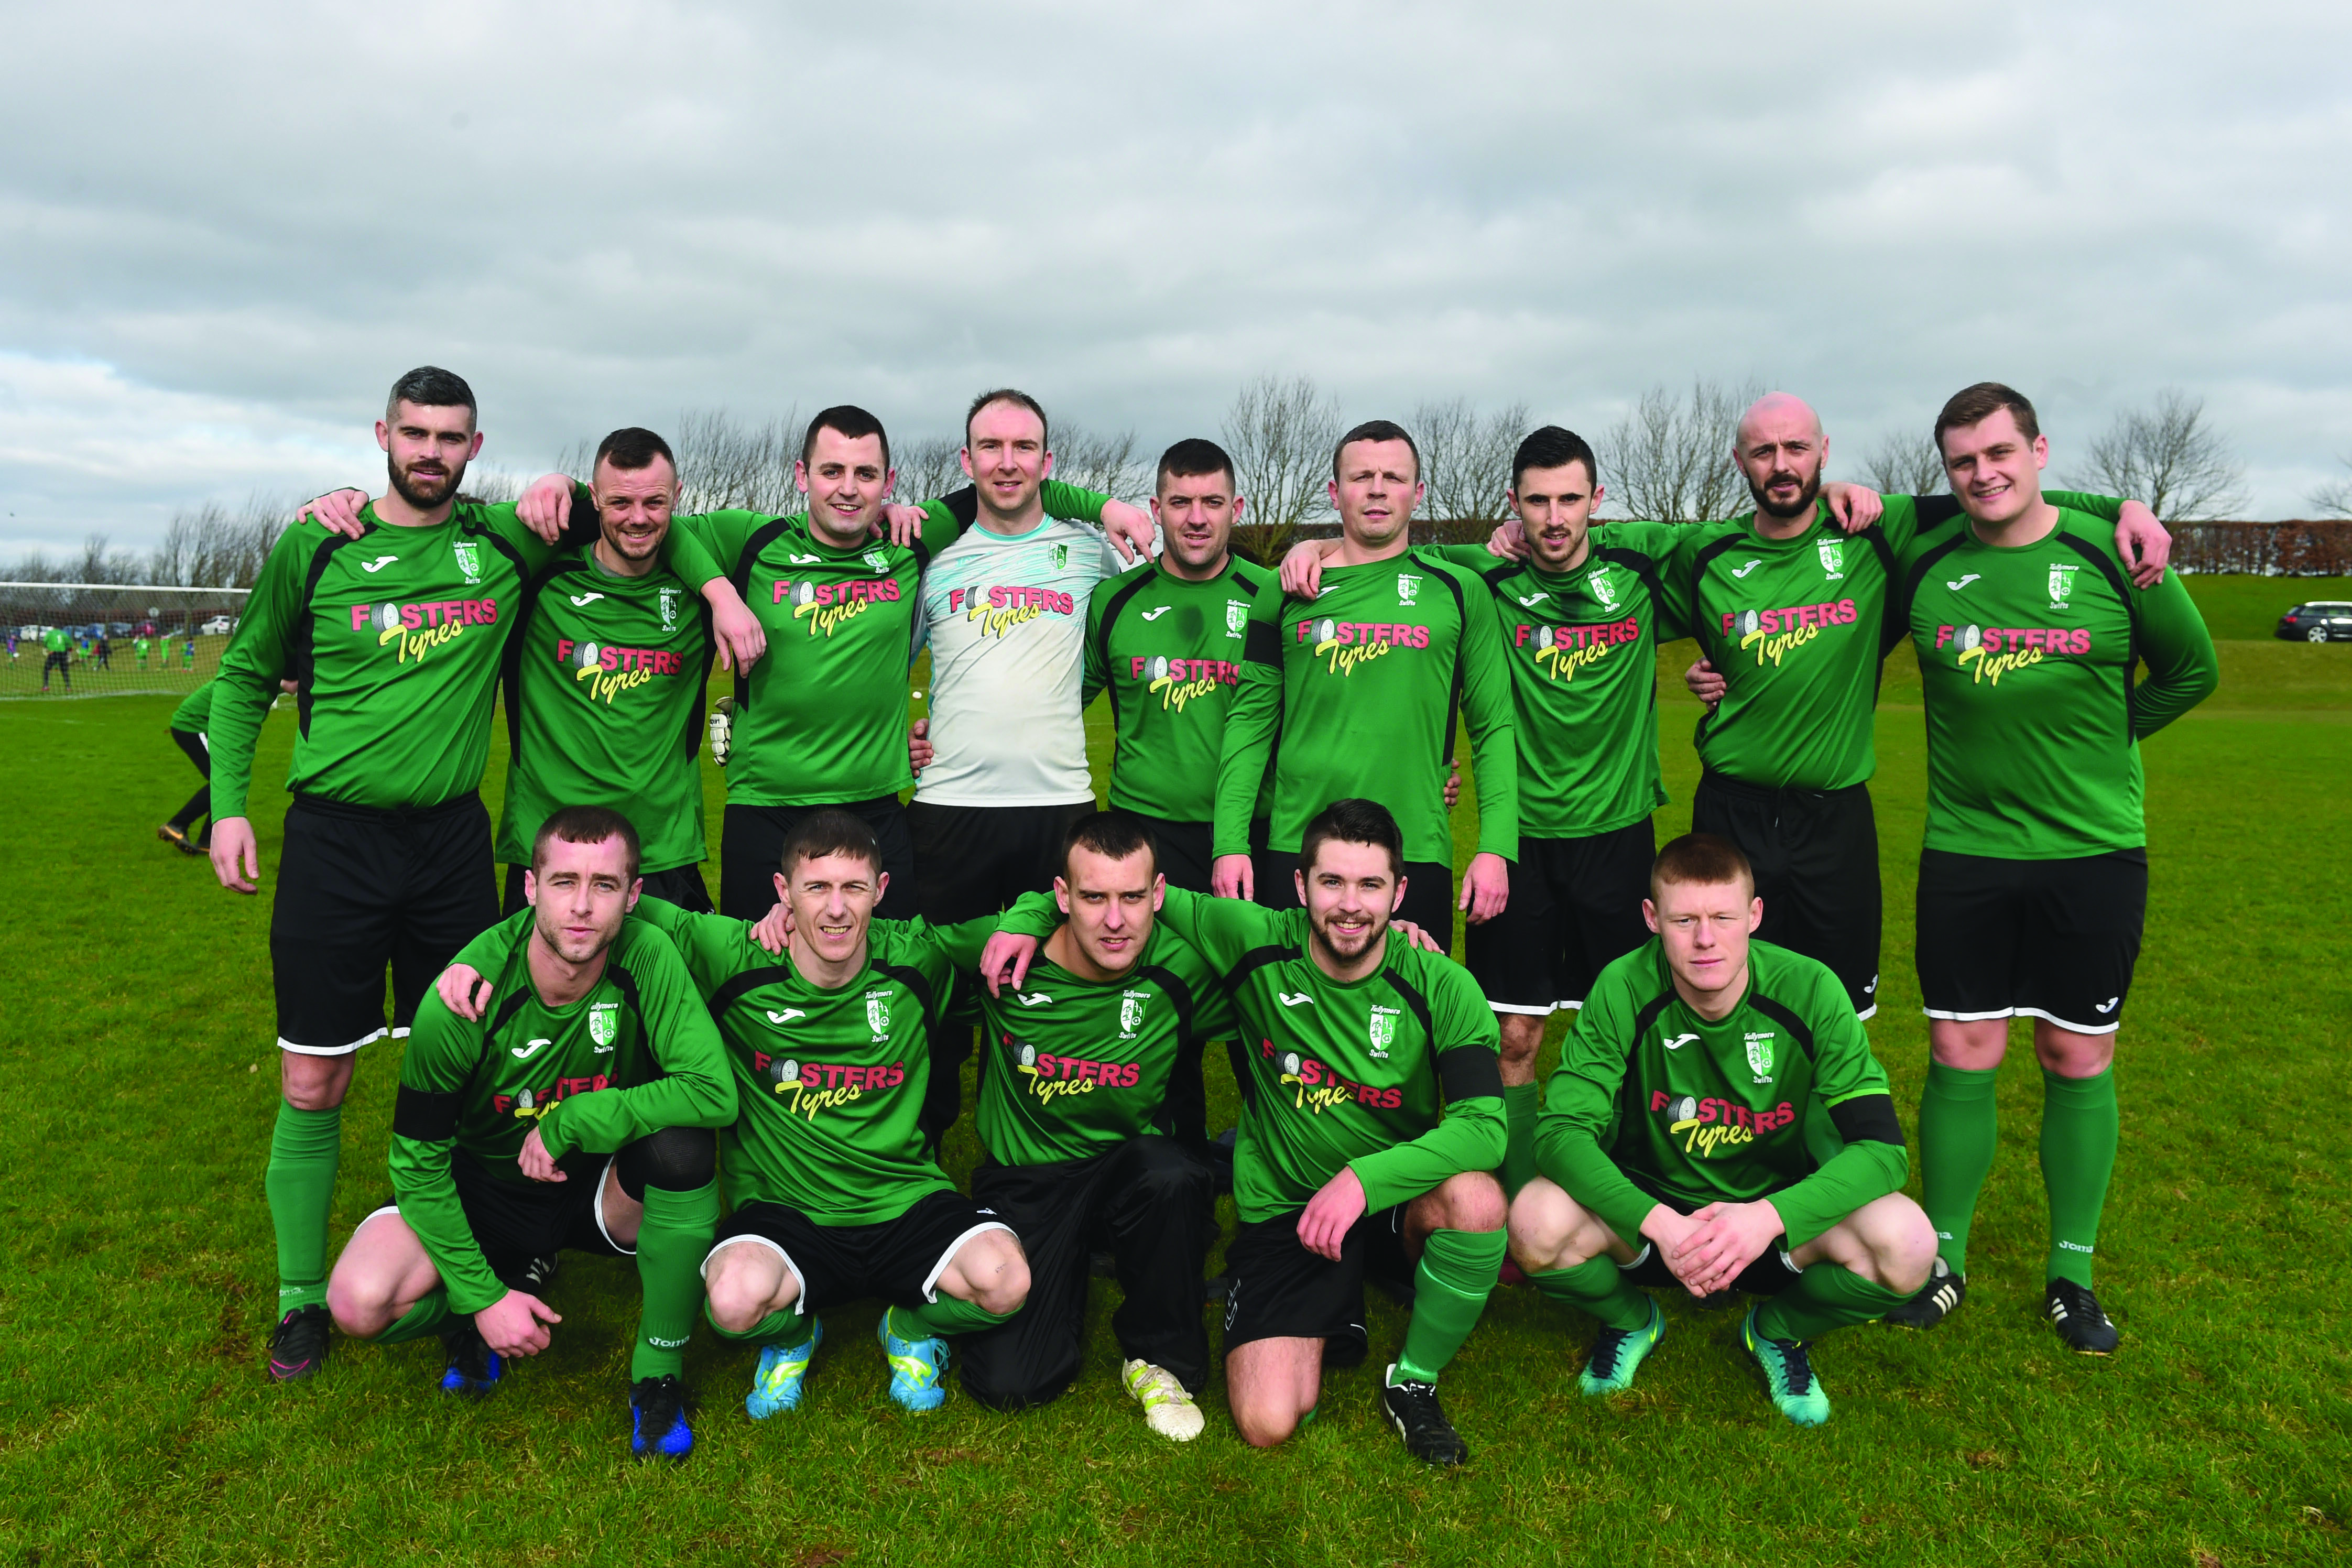 The Tullymore Swifts team before Saturday’s game at Mallusk